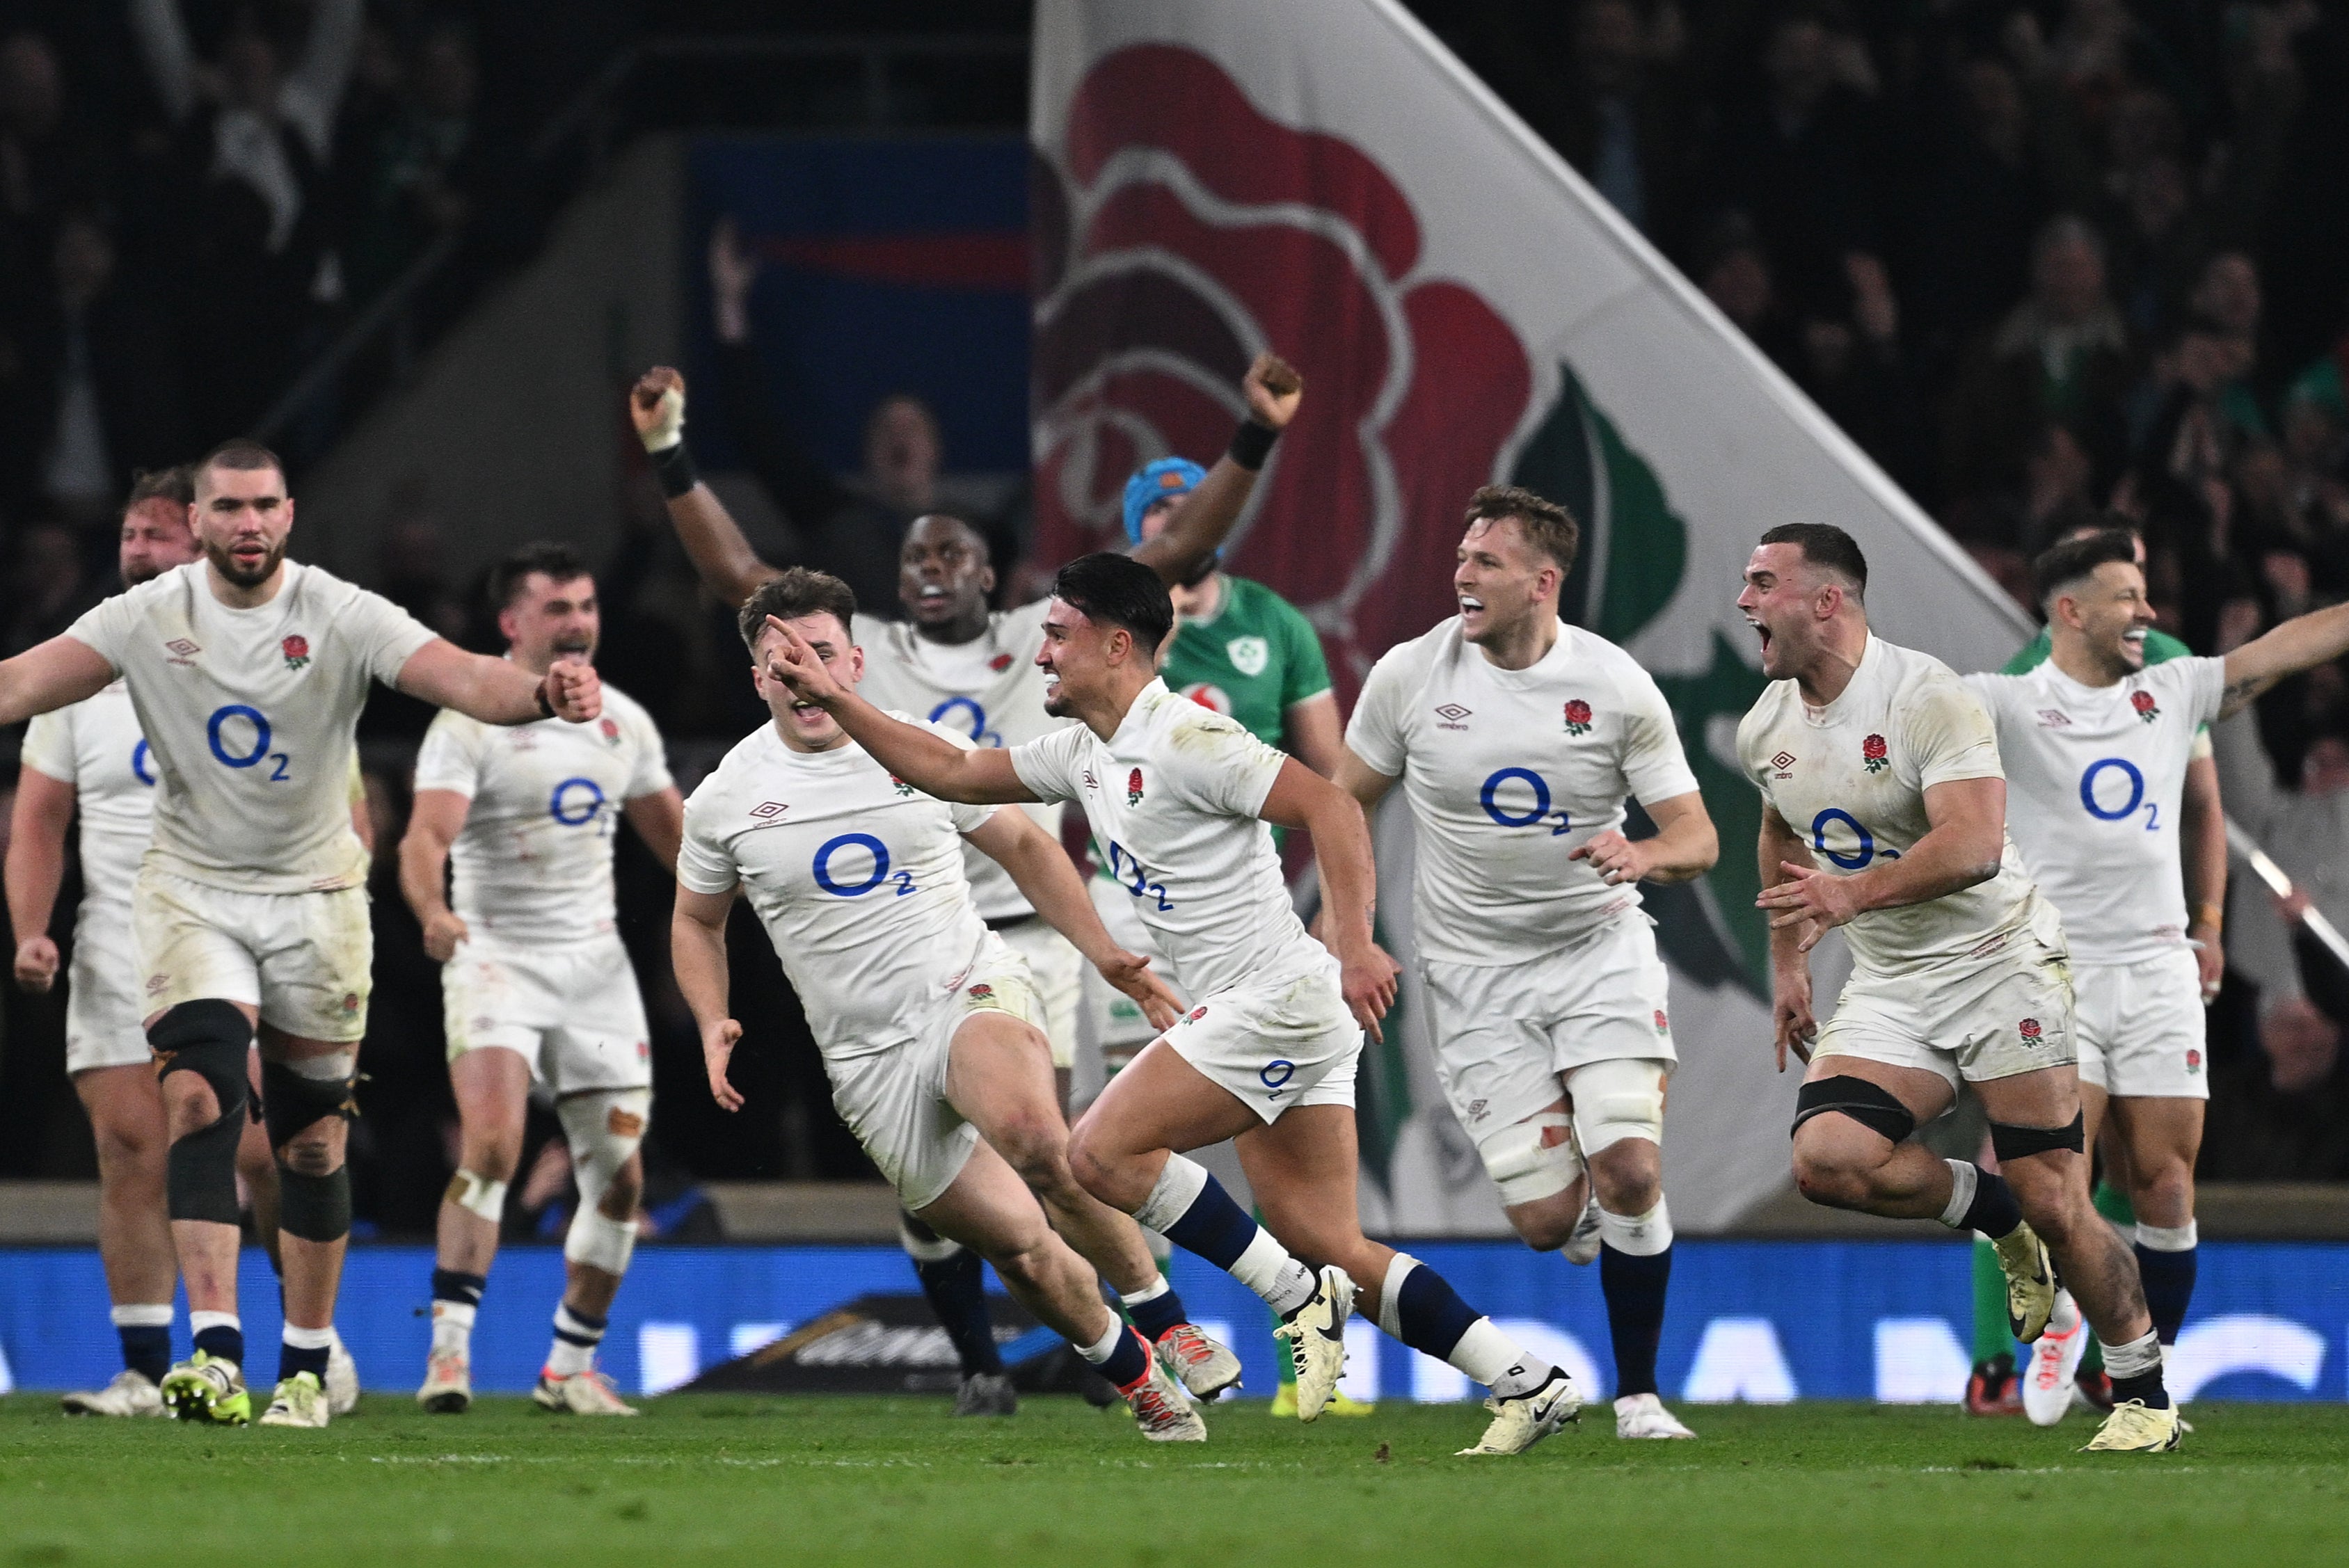 England produced their best home performance in years to shock Ireland